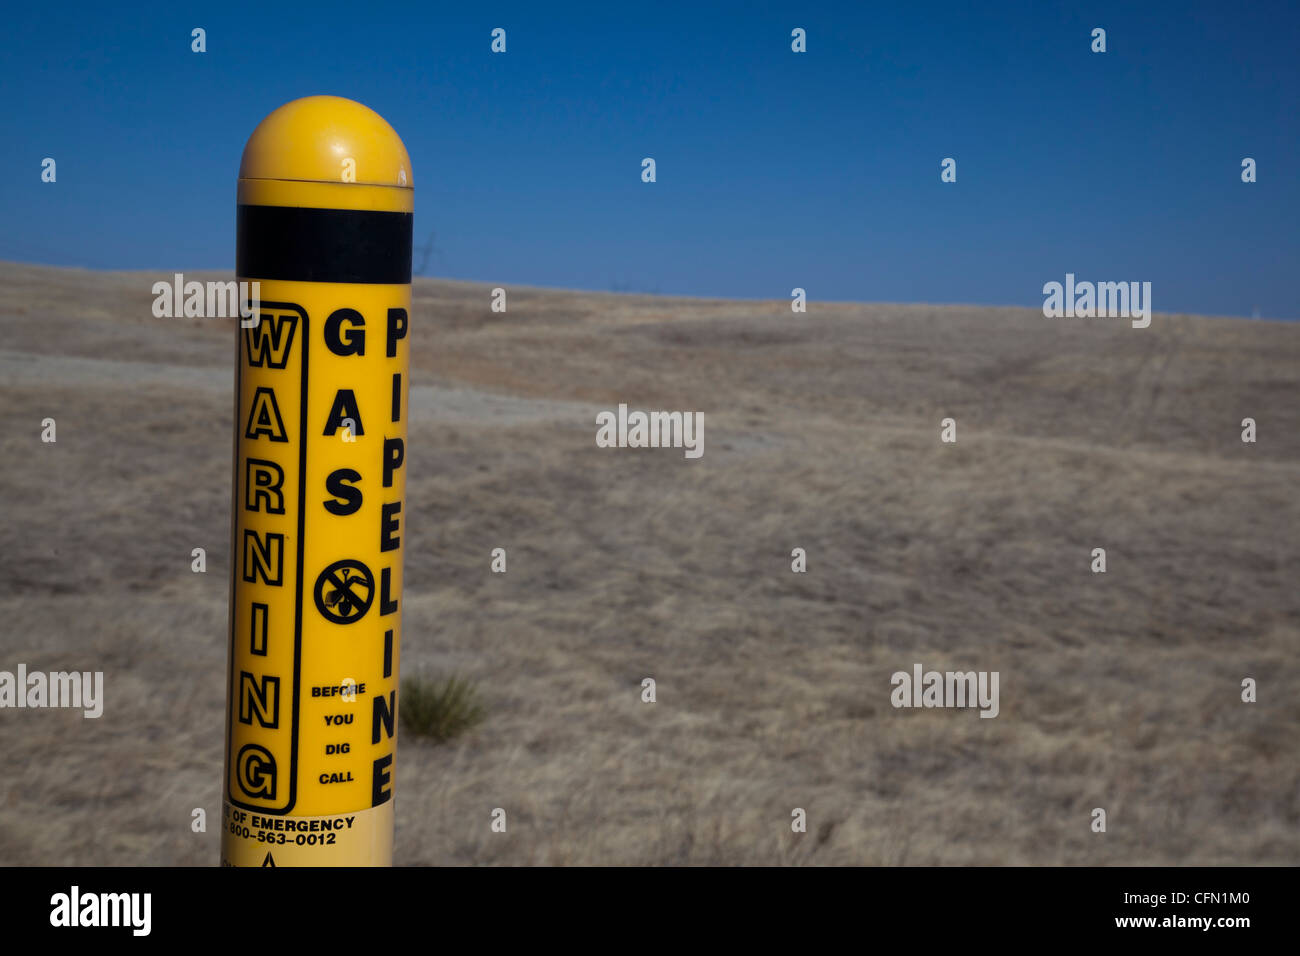 Brule, Nebraska - A marker warns of a buried natural gas pipeline. Stock Photo